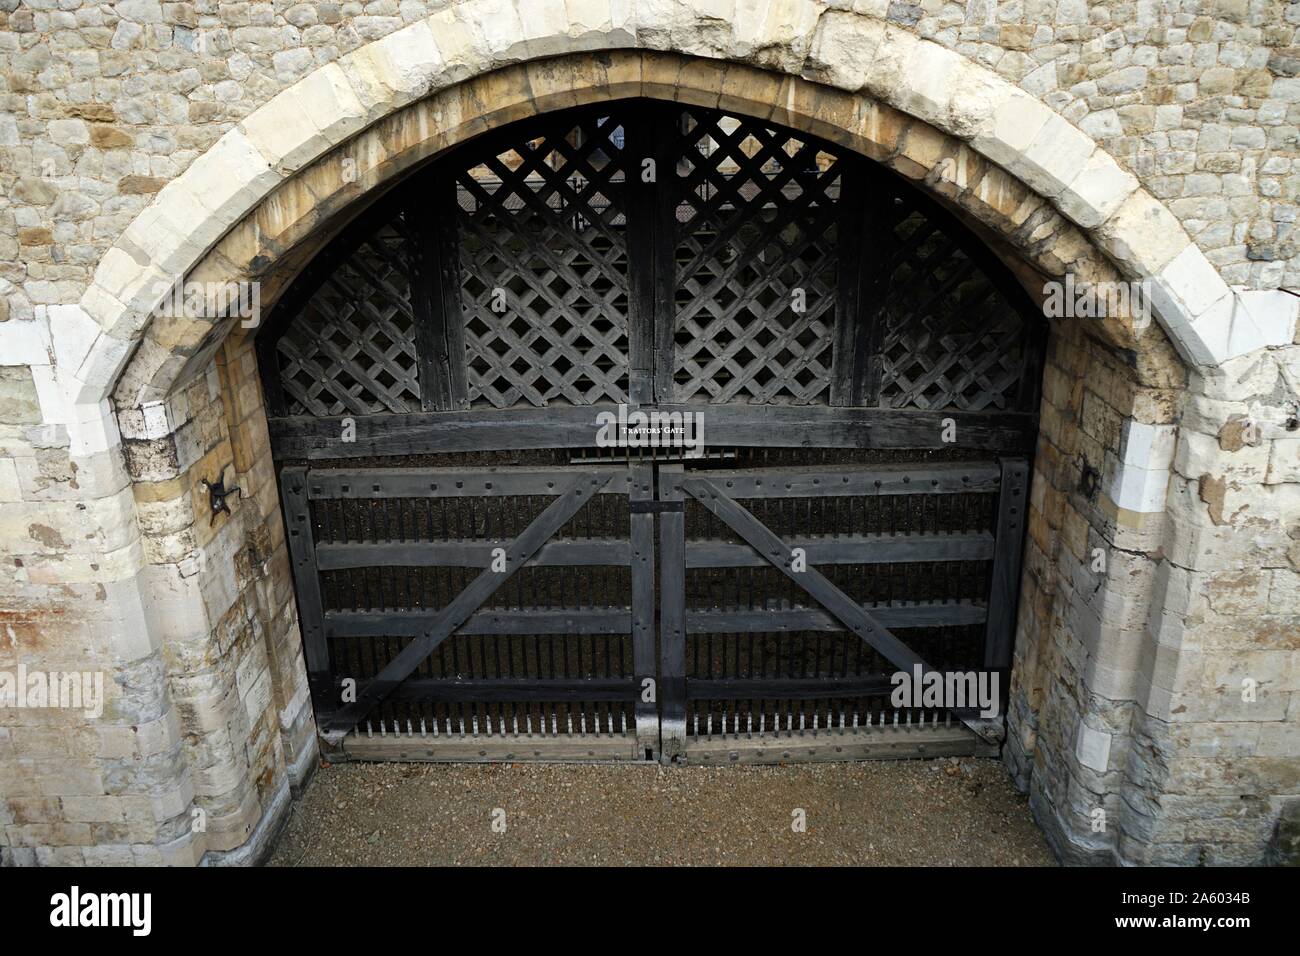 Traitors' Gate at the Tower of London. Prisoner's would have entered the Tower of London through this gate. Built by Edward I (1239-1307). Dated 13th Century Stock Photo